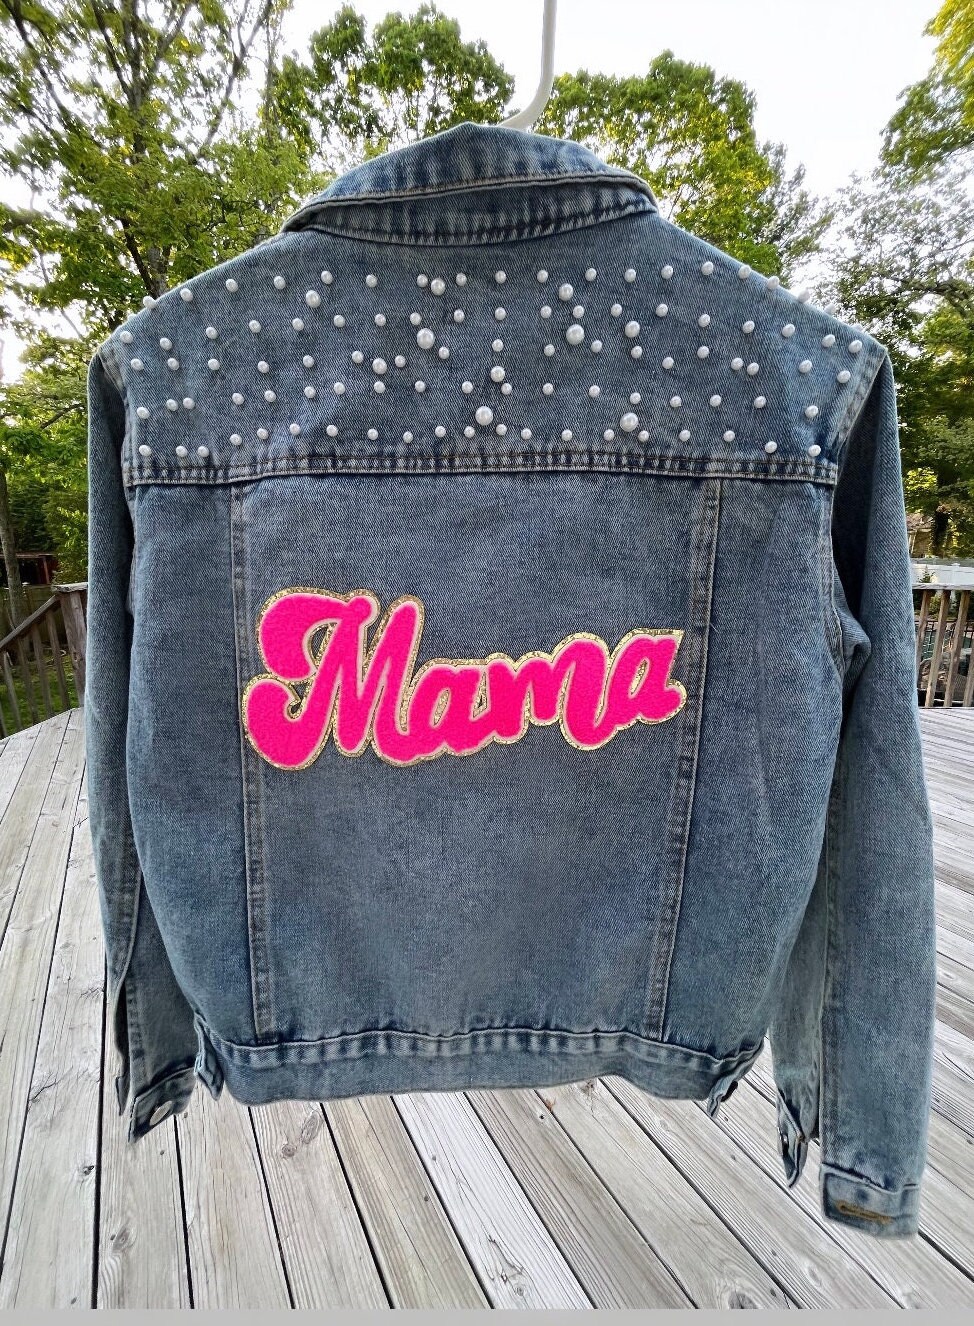 EXCEART Jeans Embroidered Jean Jacket Denim Jackets Denim Jeans Cap  Decorations Decor Trendy Decor Patch Jeans Jacket Jean Patches for Inner  Thighs